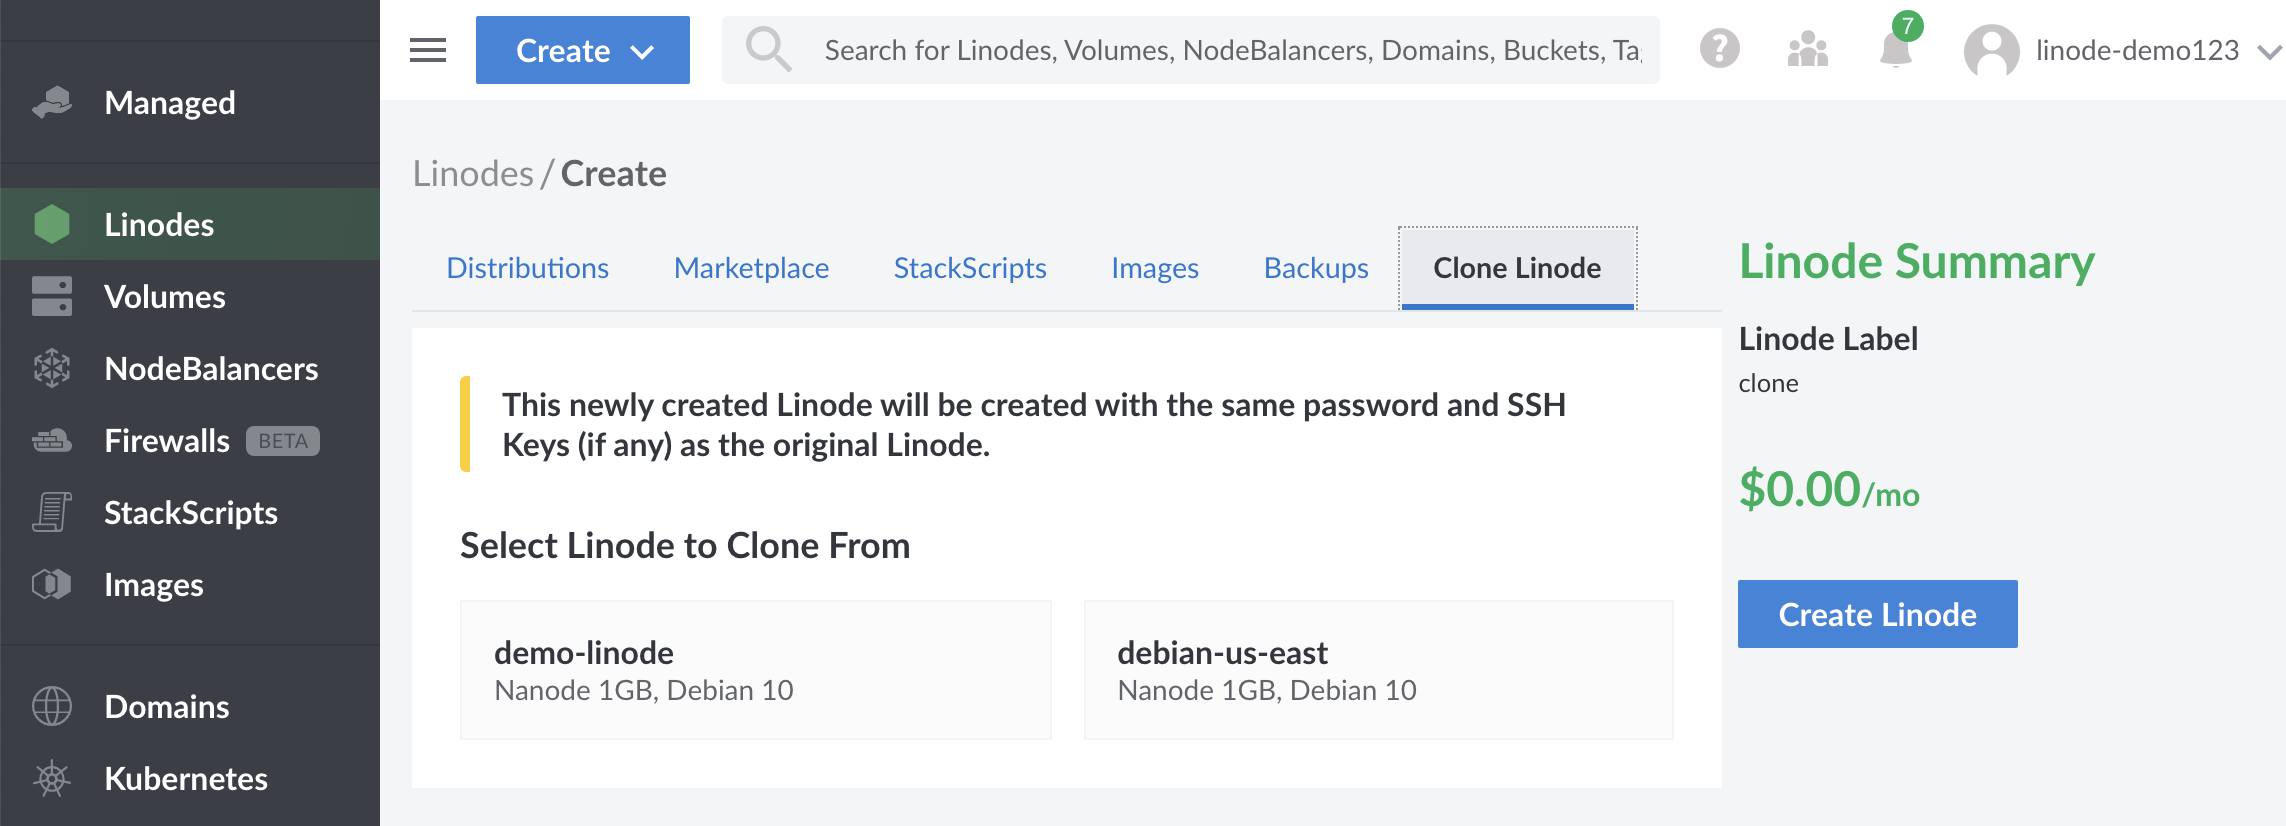 Select the &lsquo;Clone Linode&rsquo; tab to clone an existing Linode.